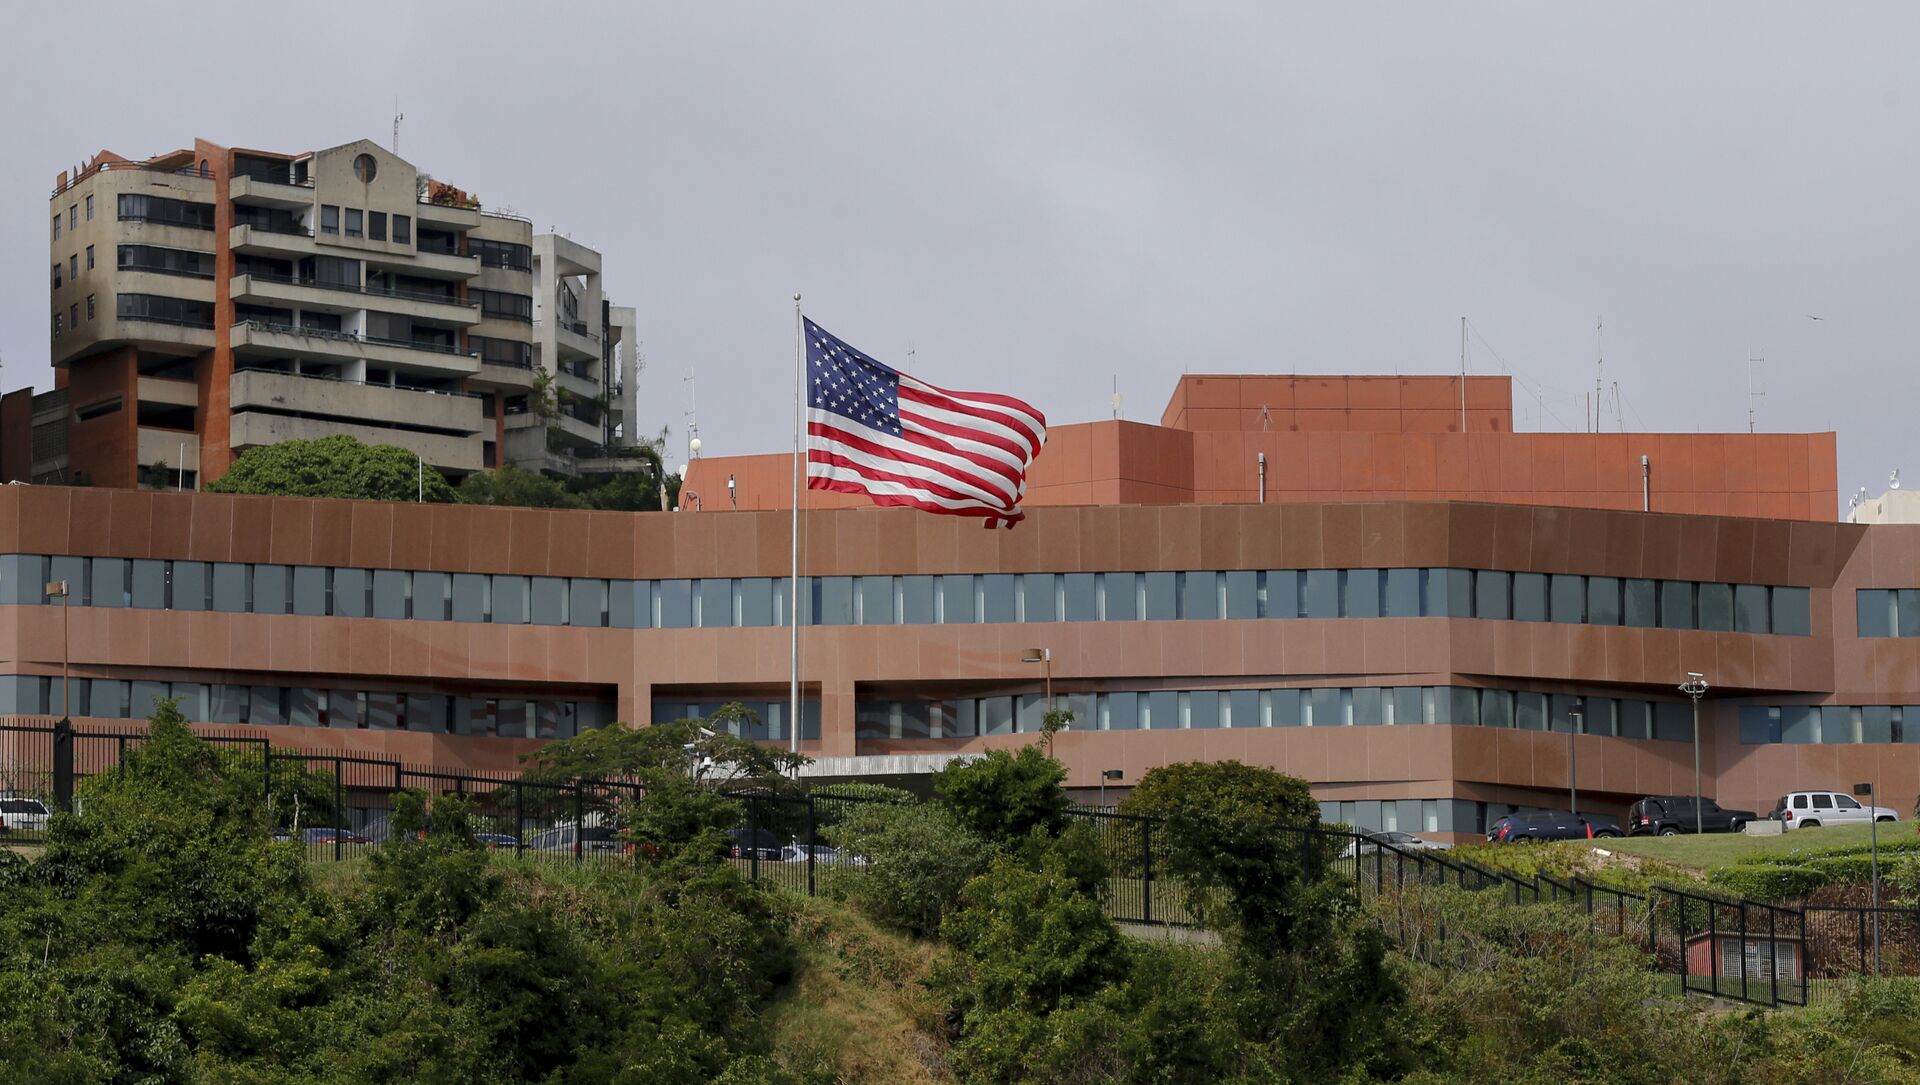 A US flag flying outside the US Embassy in Caracas, Venezuela, in January 2019, weeks before the breaking of diplomatic relations between both countries after the launching of the failed US "regime change" operation to oust President Nicolás Maduro. Photo: Fernando Llano/AP/File photo.